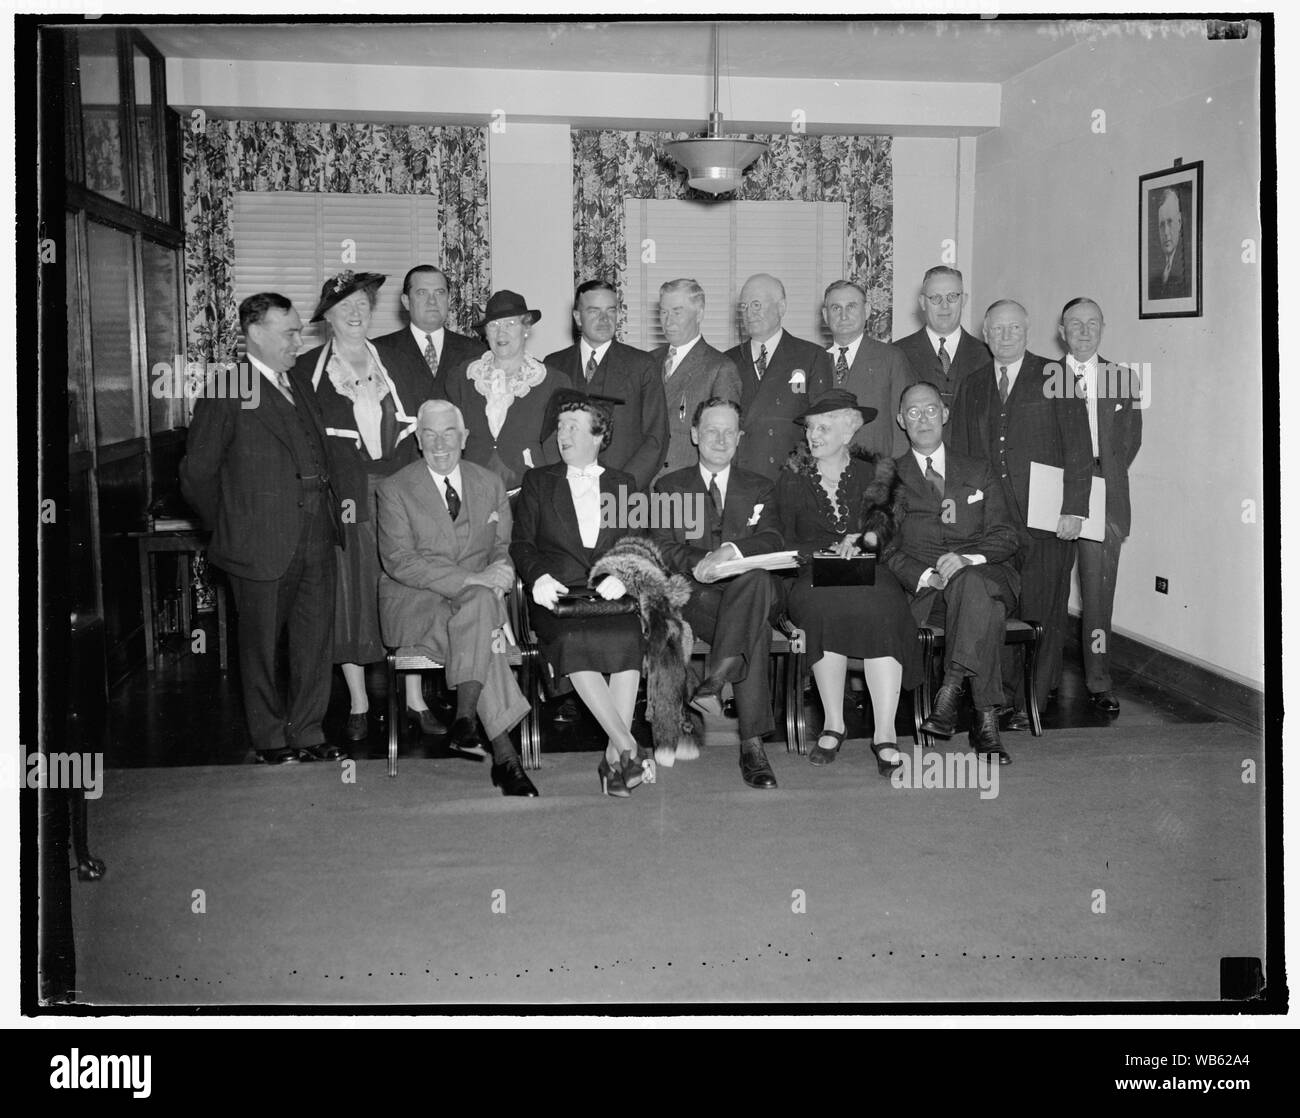 Executive Committee of the National Republican Committee. Washington, D.C., Sept. 23. The Executive Committee of the Republican National Committee held their first meeting to plan their campaigns for the Congressional Elections that are to be held in 1938. Left to right, seated are: Henry P. Fletcher of R.I., Mrs. Marjorie Scranton of PA., John Hamilton of Kansas, Chairman, Mrs. John E. Hillman of Colo., C.B. Goodspeed of Ill., Treasurer, and standing left to right: Joseph W. Martin, Jr. of Mass., Mrs. Paul Fitzsimmons of R.I., Walter S. Hallanan of West. VA., [...]S. Harace B. Sayre of Okla., Stock Photo